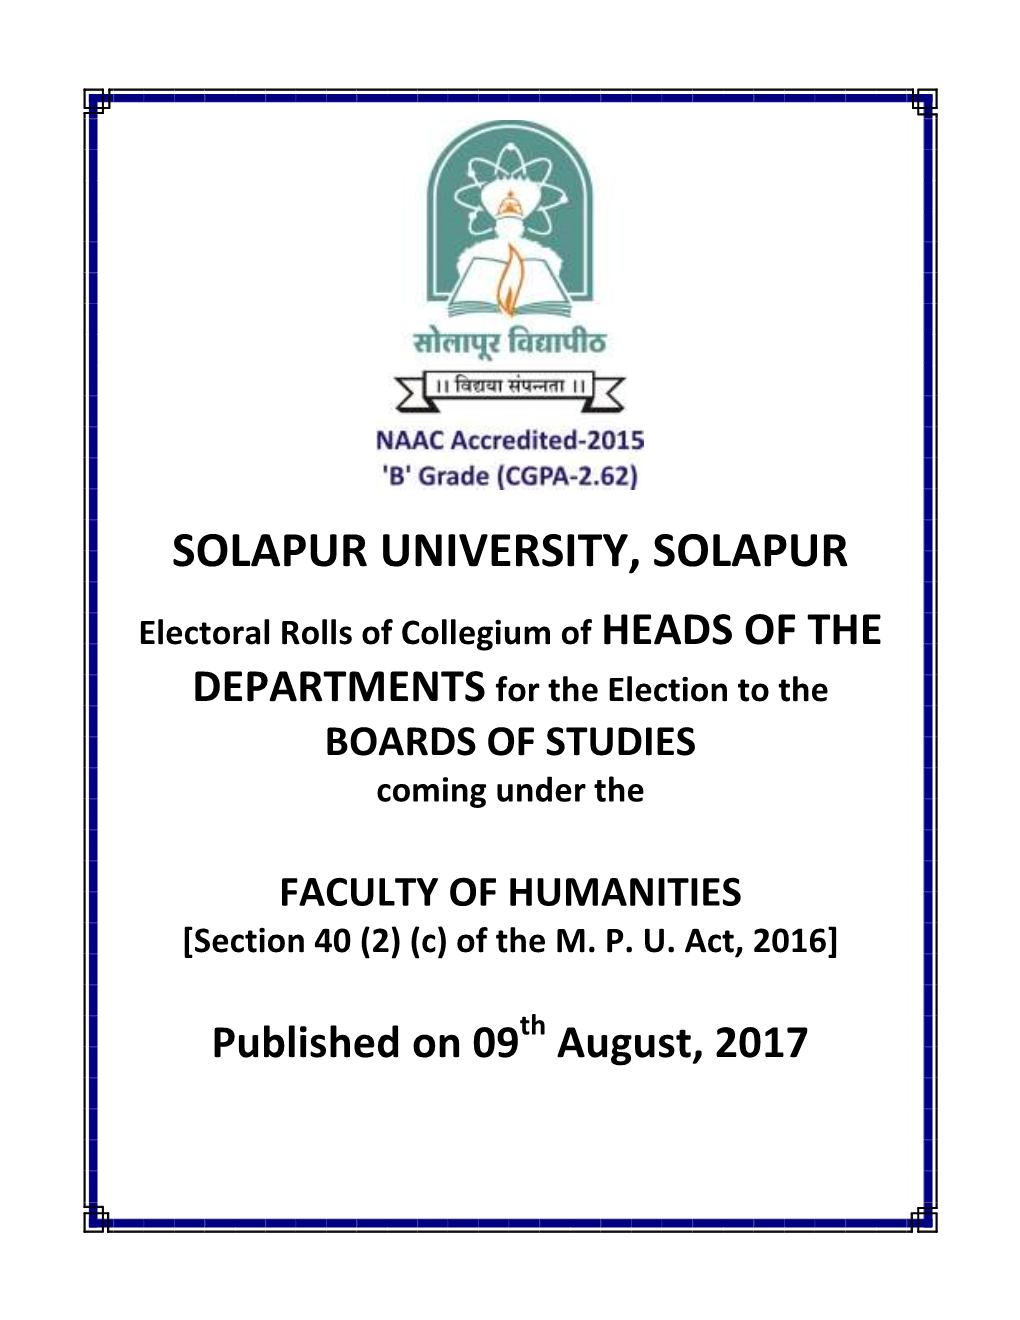 Electoral Rolls of Collegium of HEADS of the DEPARTMENTS for the Election to the BOARDS of STUDIES Coming Under The